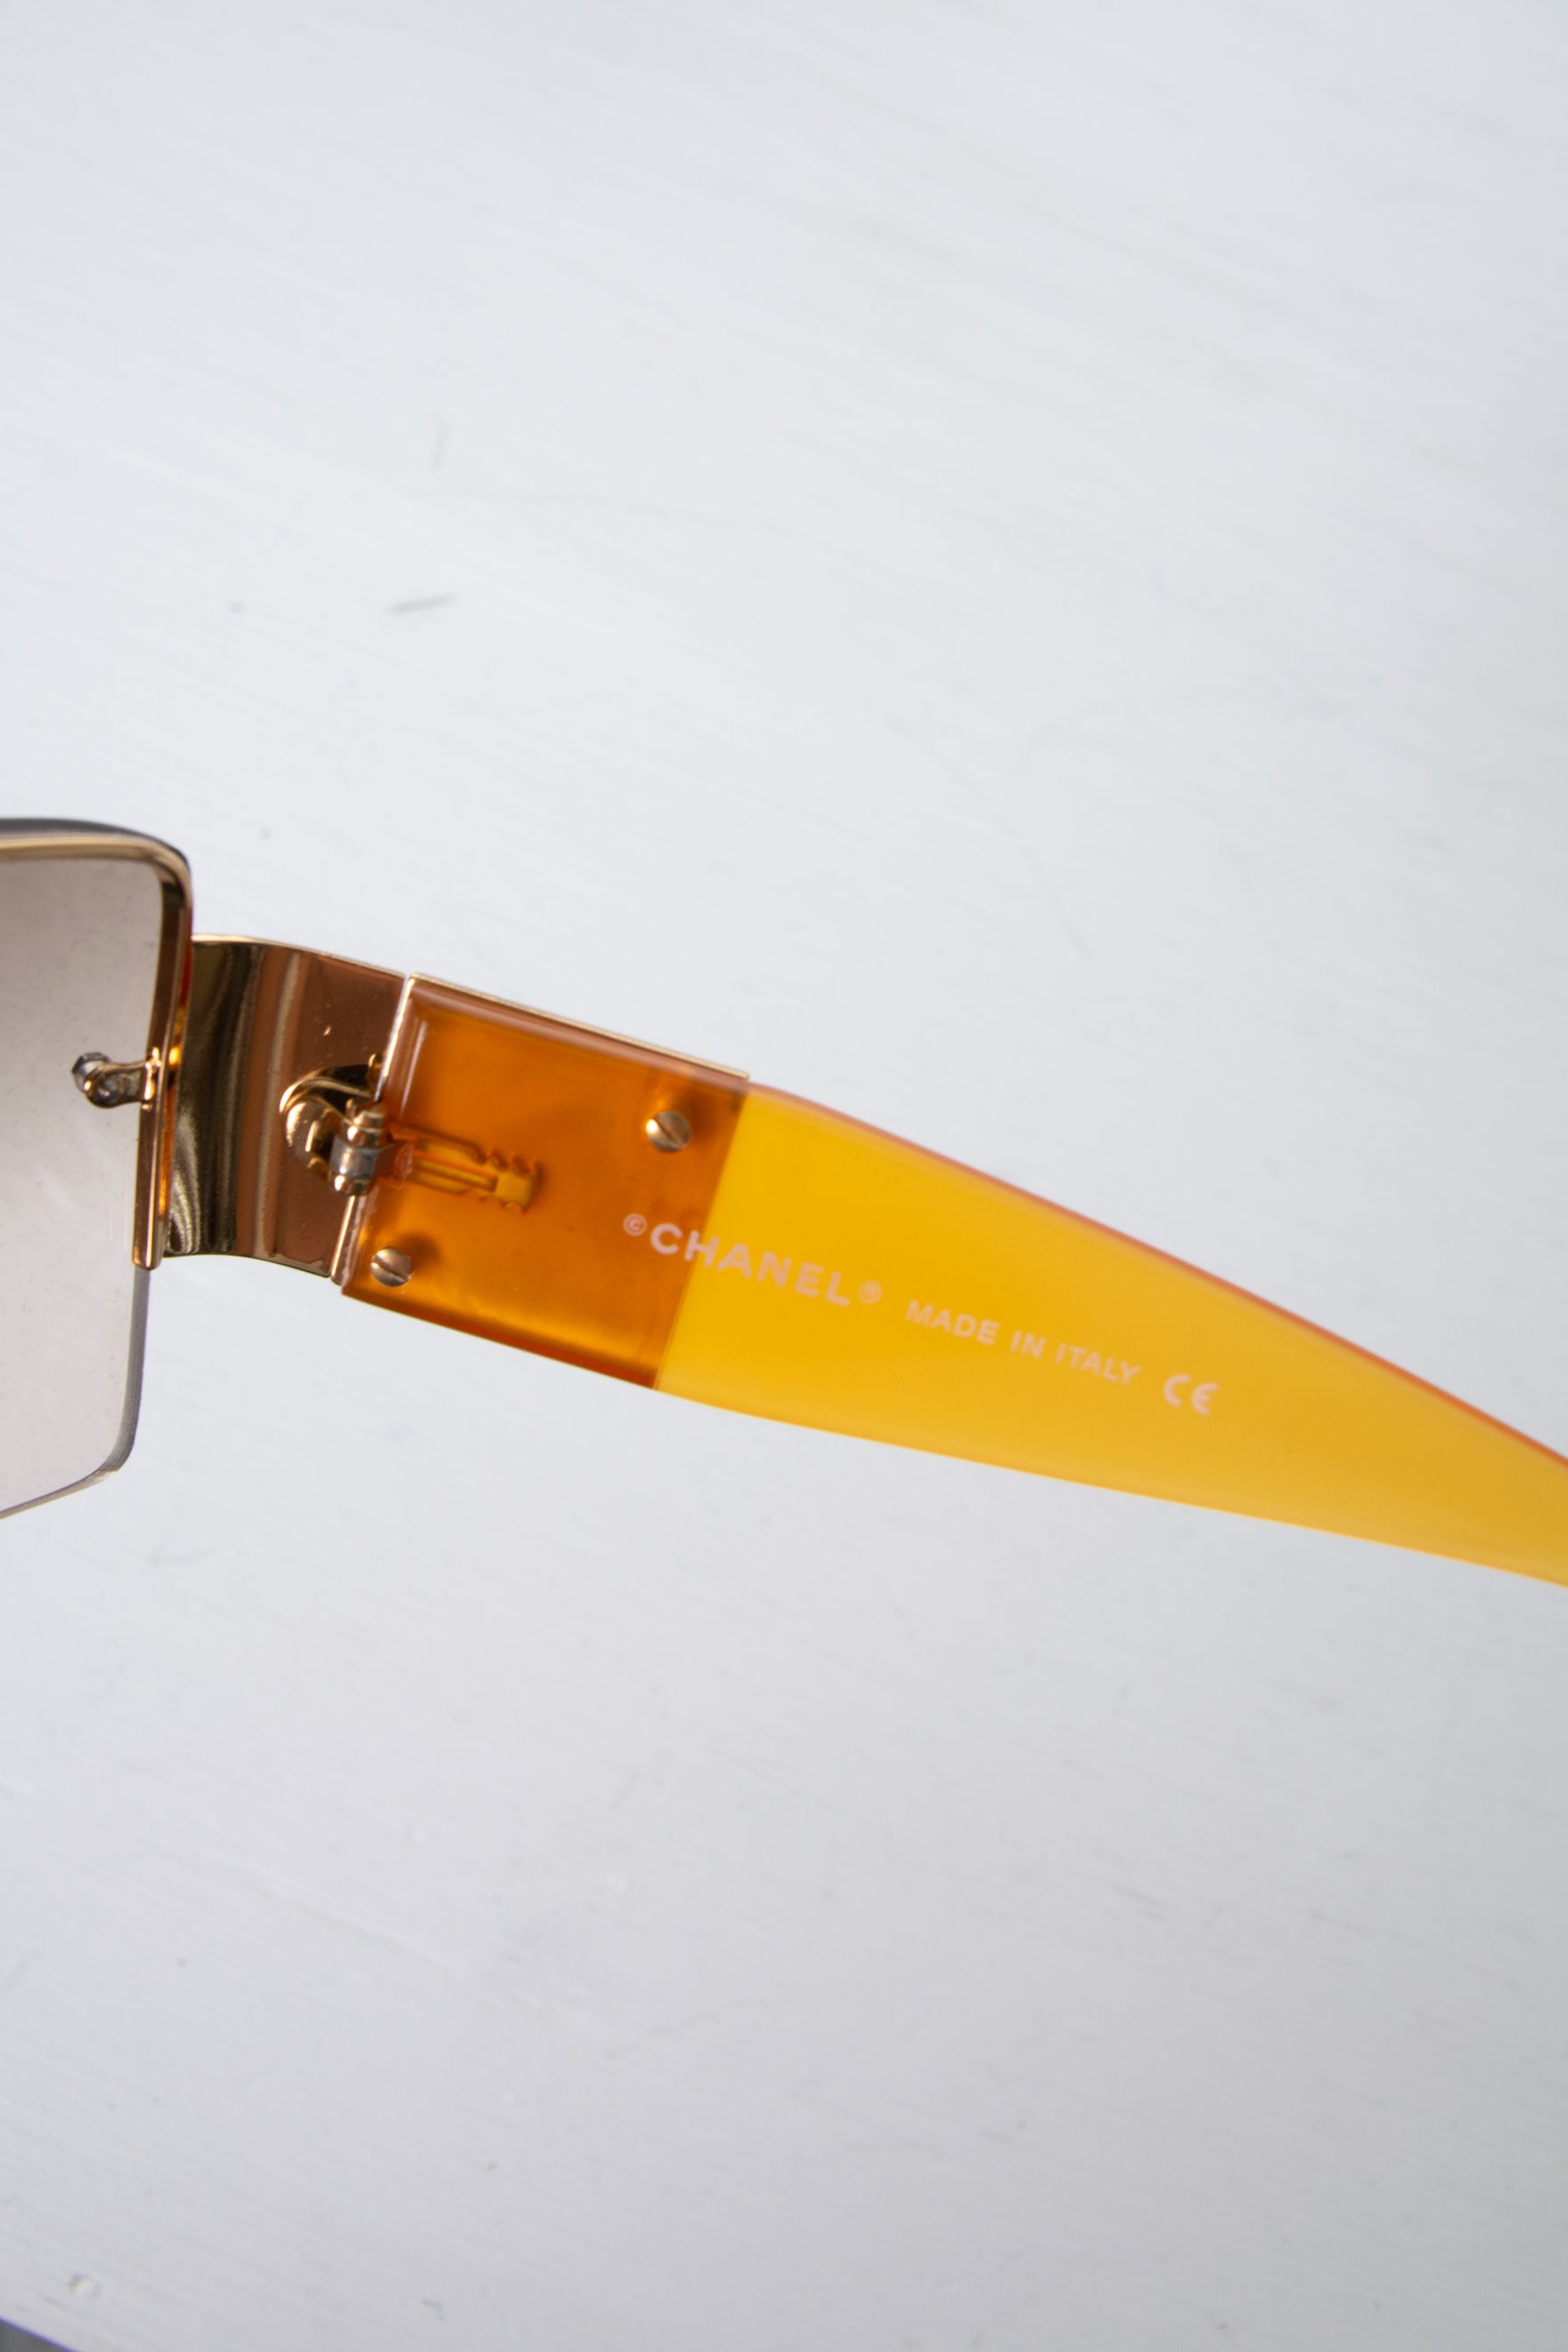 Chanel Sunglasses 4095-B Yellow Gold￼￼ Swarovski Crystal ￼SOLD OUT! Needs  Lenses